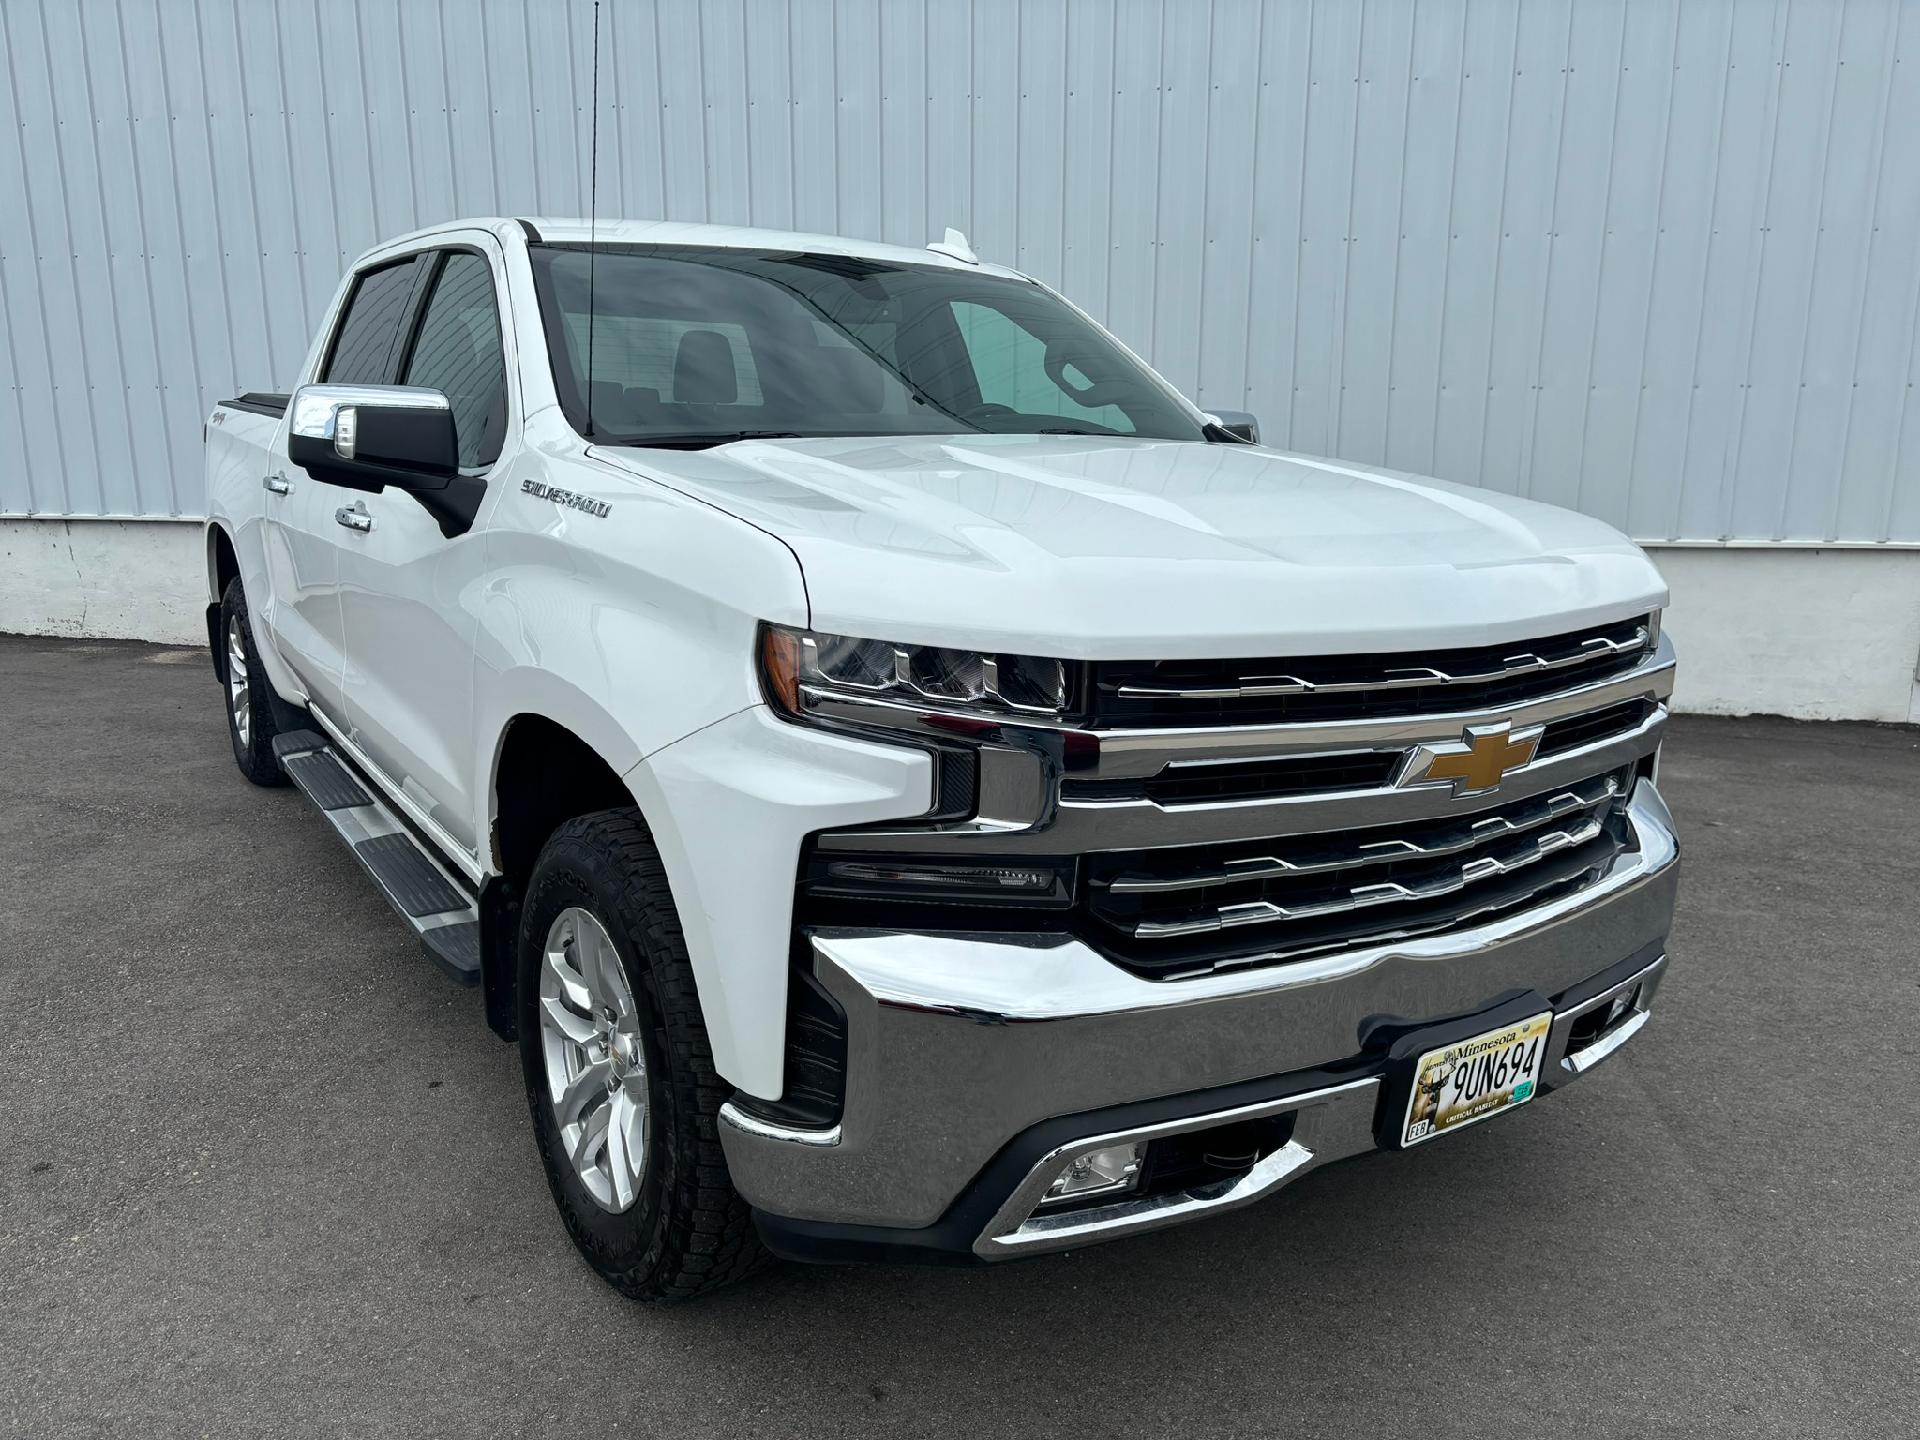 Used 2020 Chevrolet Silverado 1500 LTZ with VIN 1GCUYGEDXLZ235794 for sale in Red Lake Falls, Minnesota